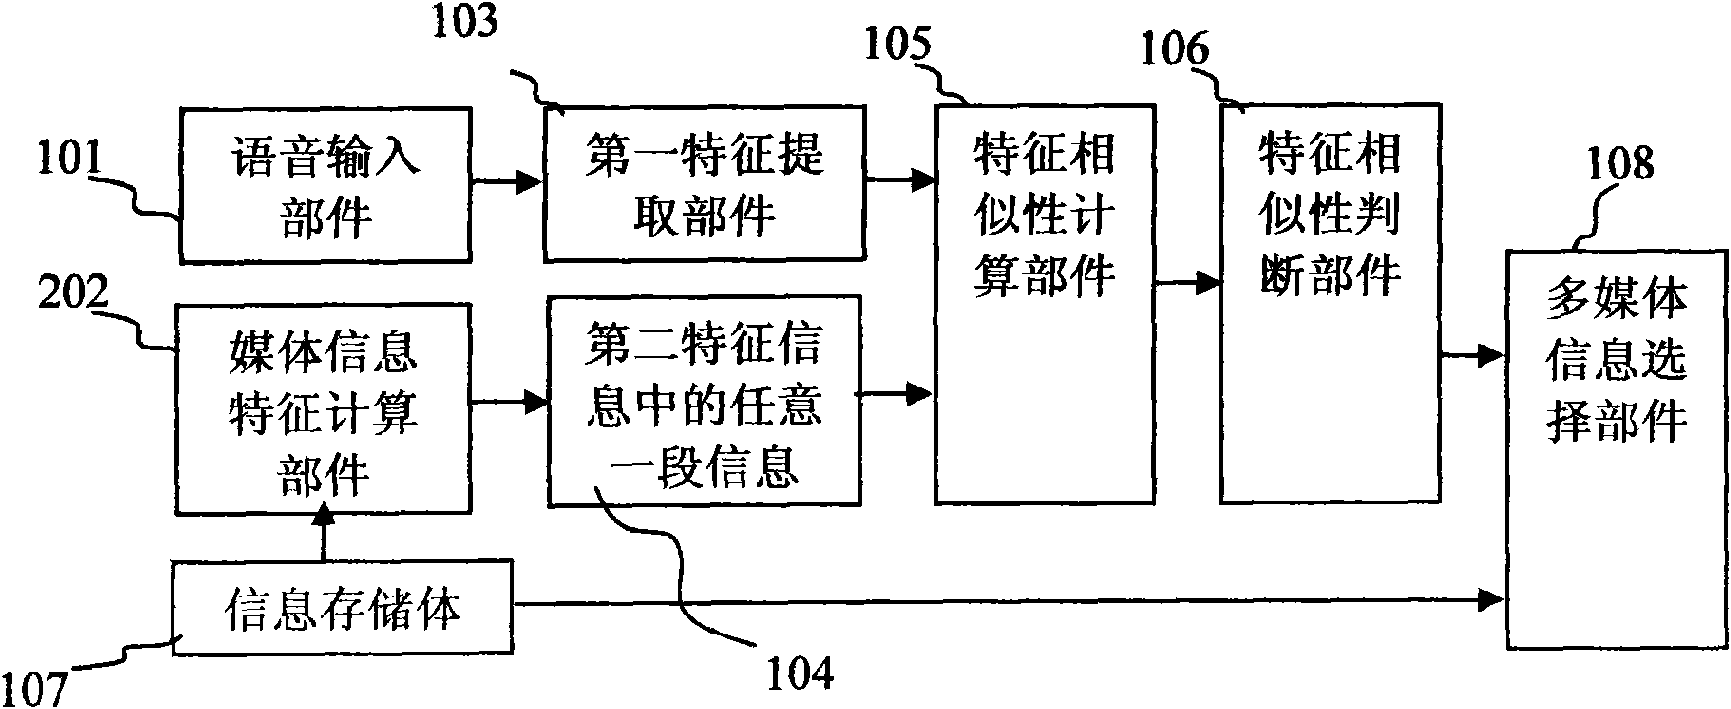 Automatic page overturning device